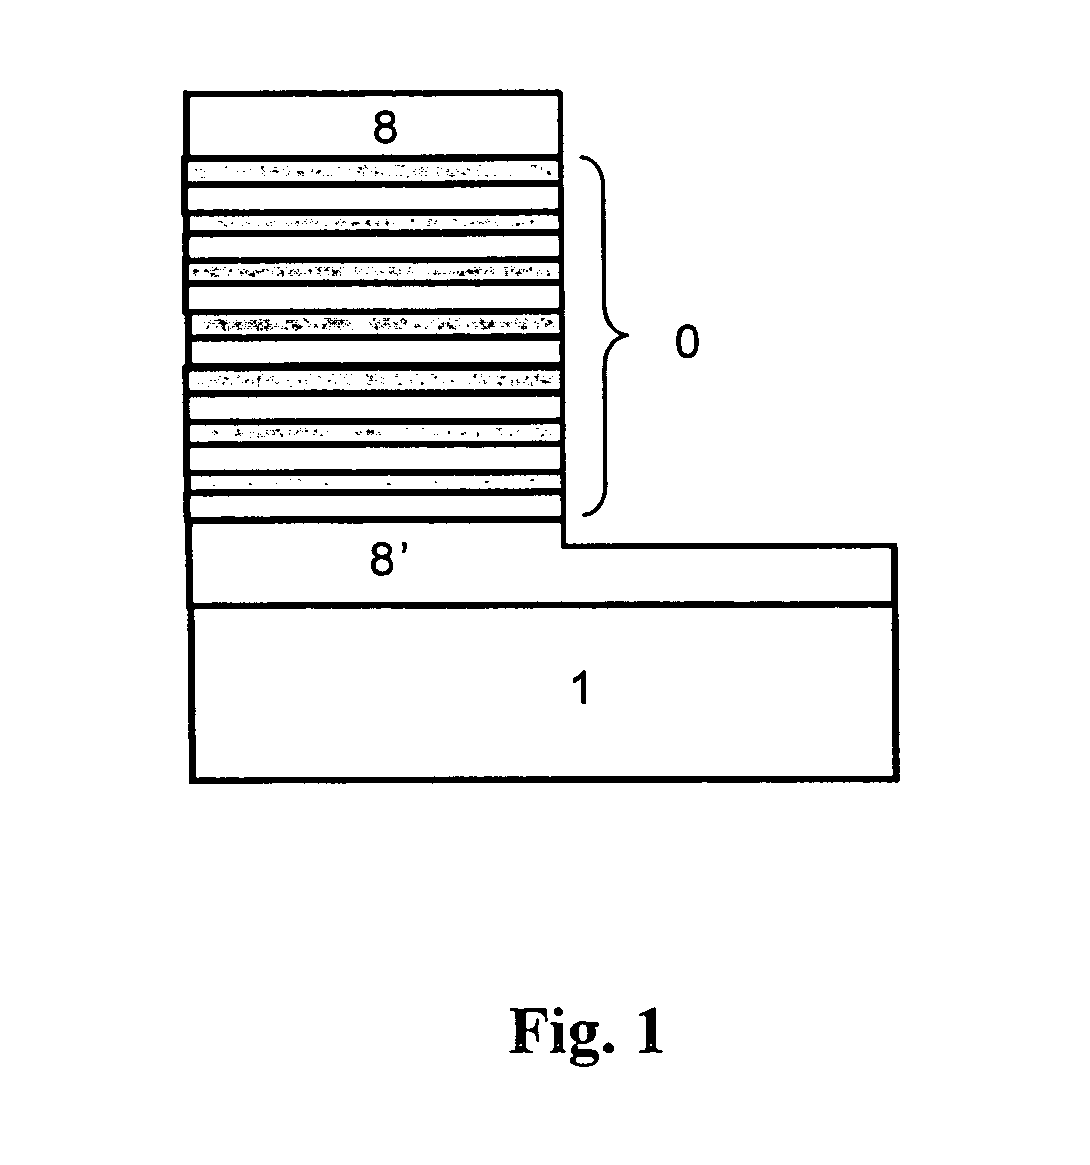 Nanoparticle structure and manufacturing process of multi-wavelength light emitting device